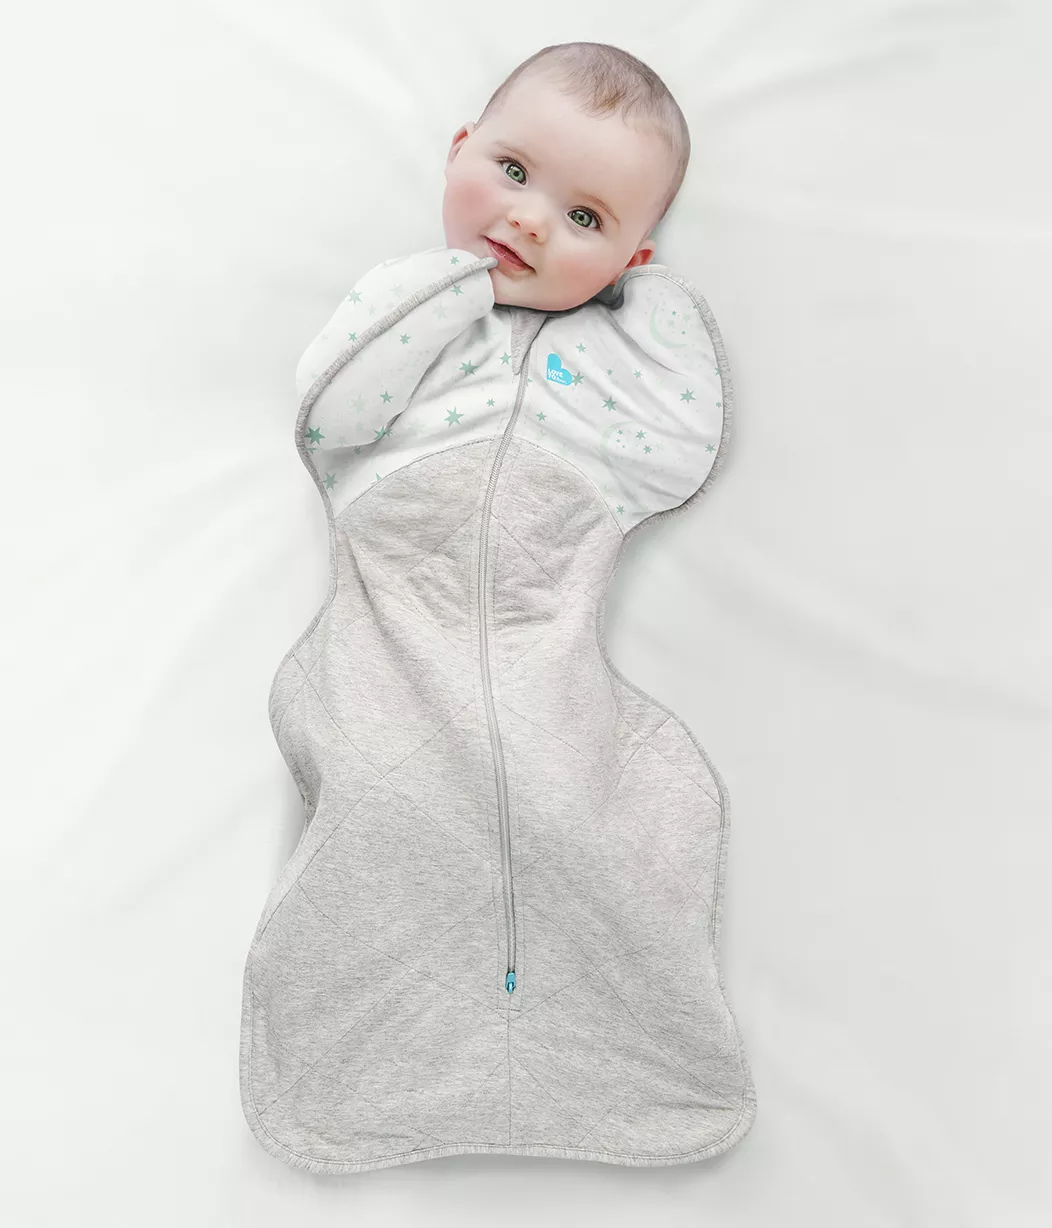 Love To Dream Swaddle Up™ 3.5 Tog | Mint